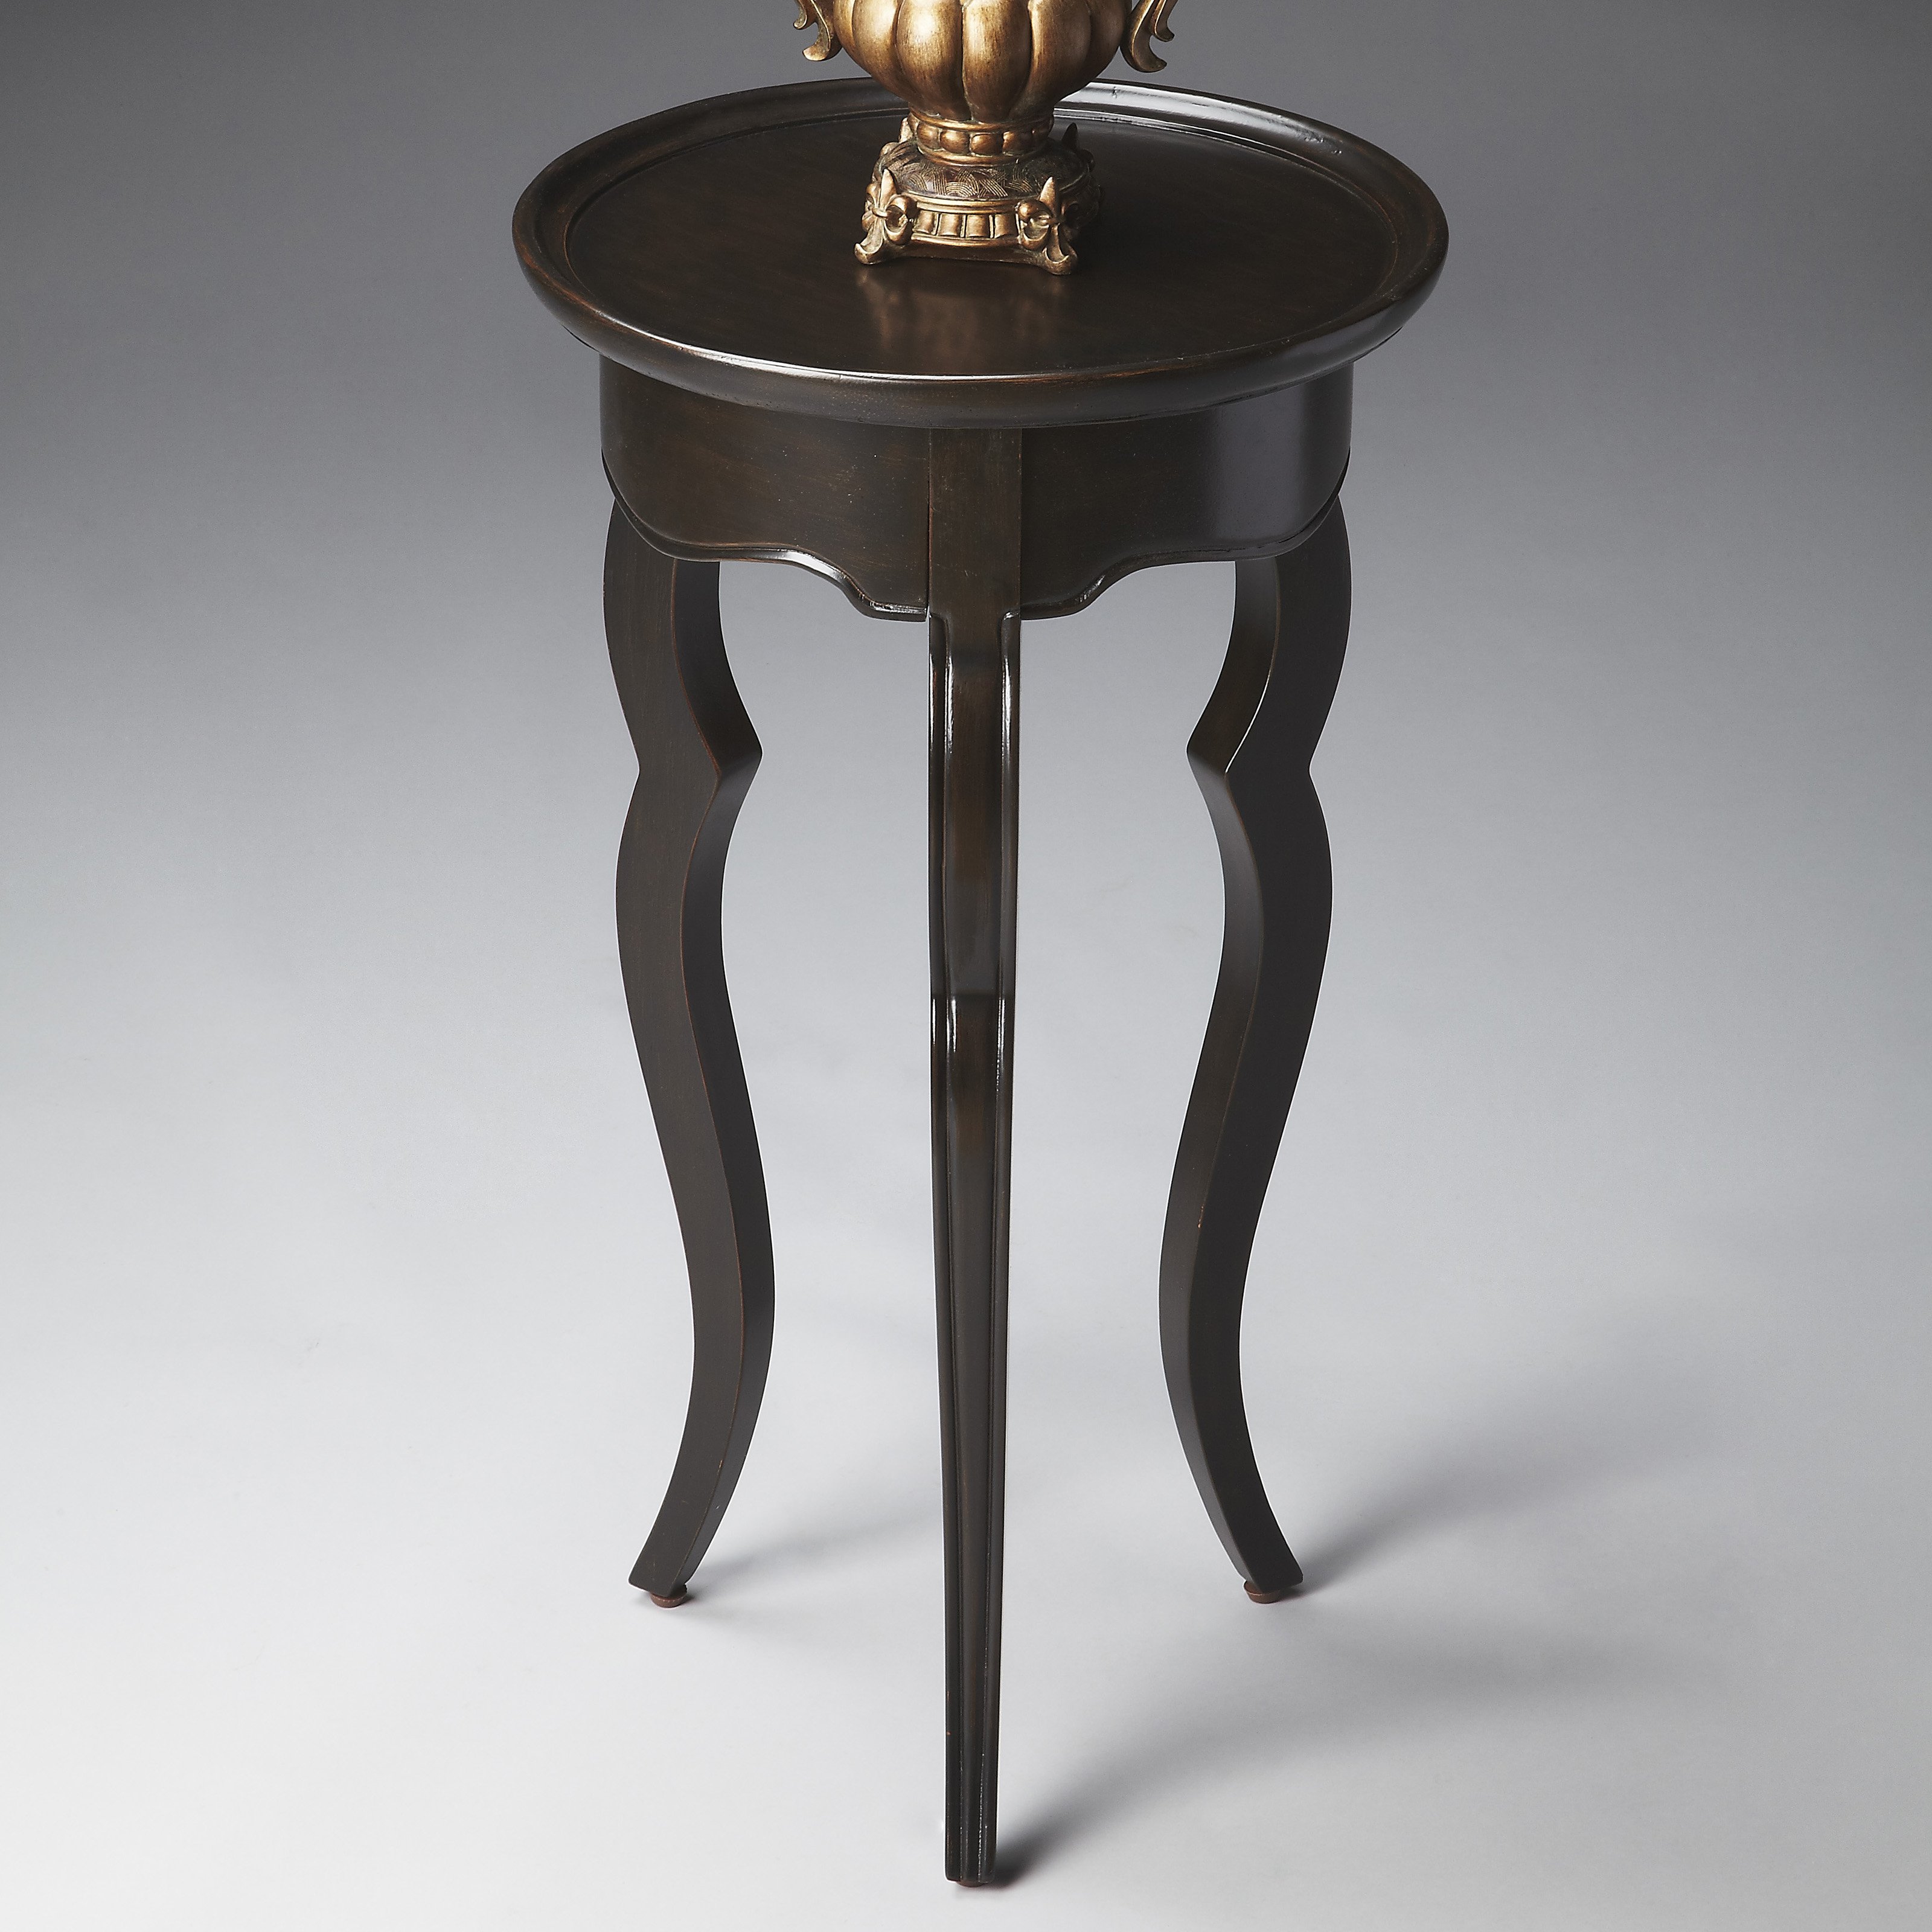 Butler Round Accent Table - Rubbed Black - image 1 of 2